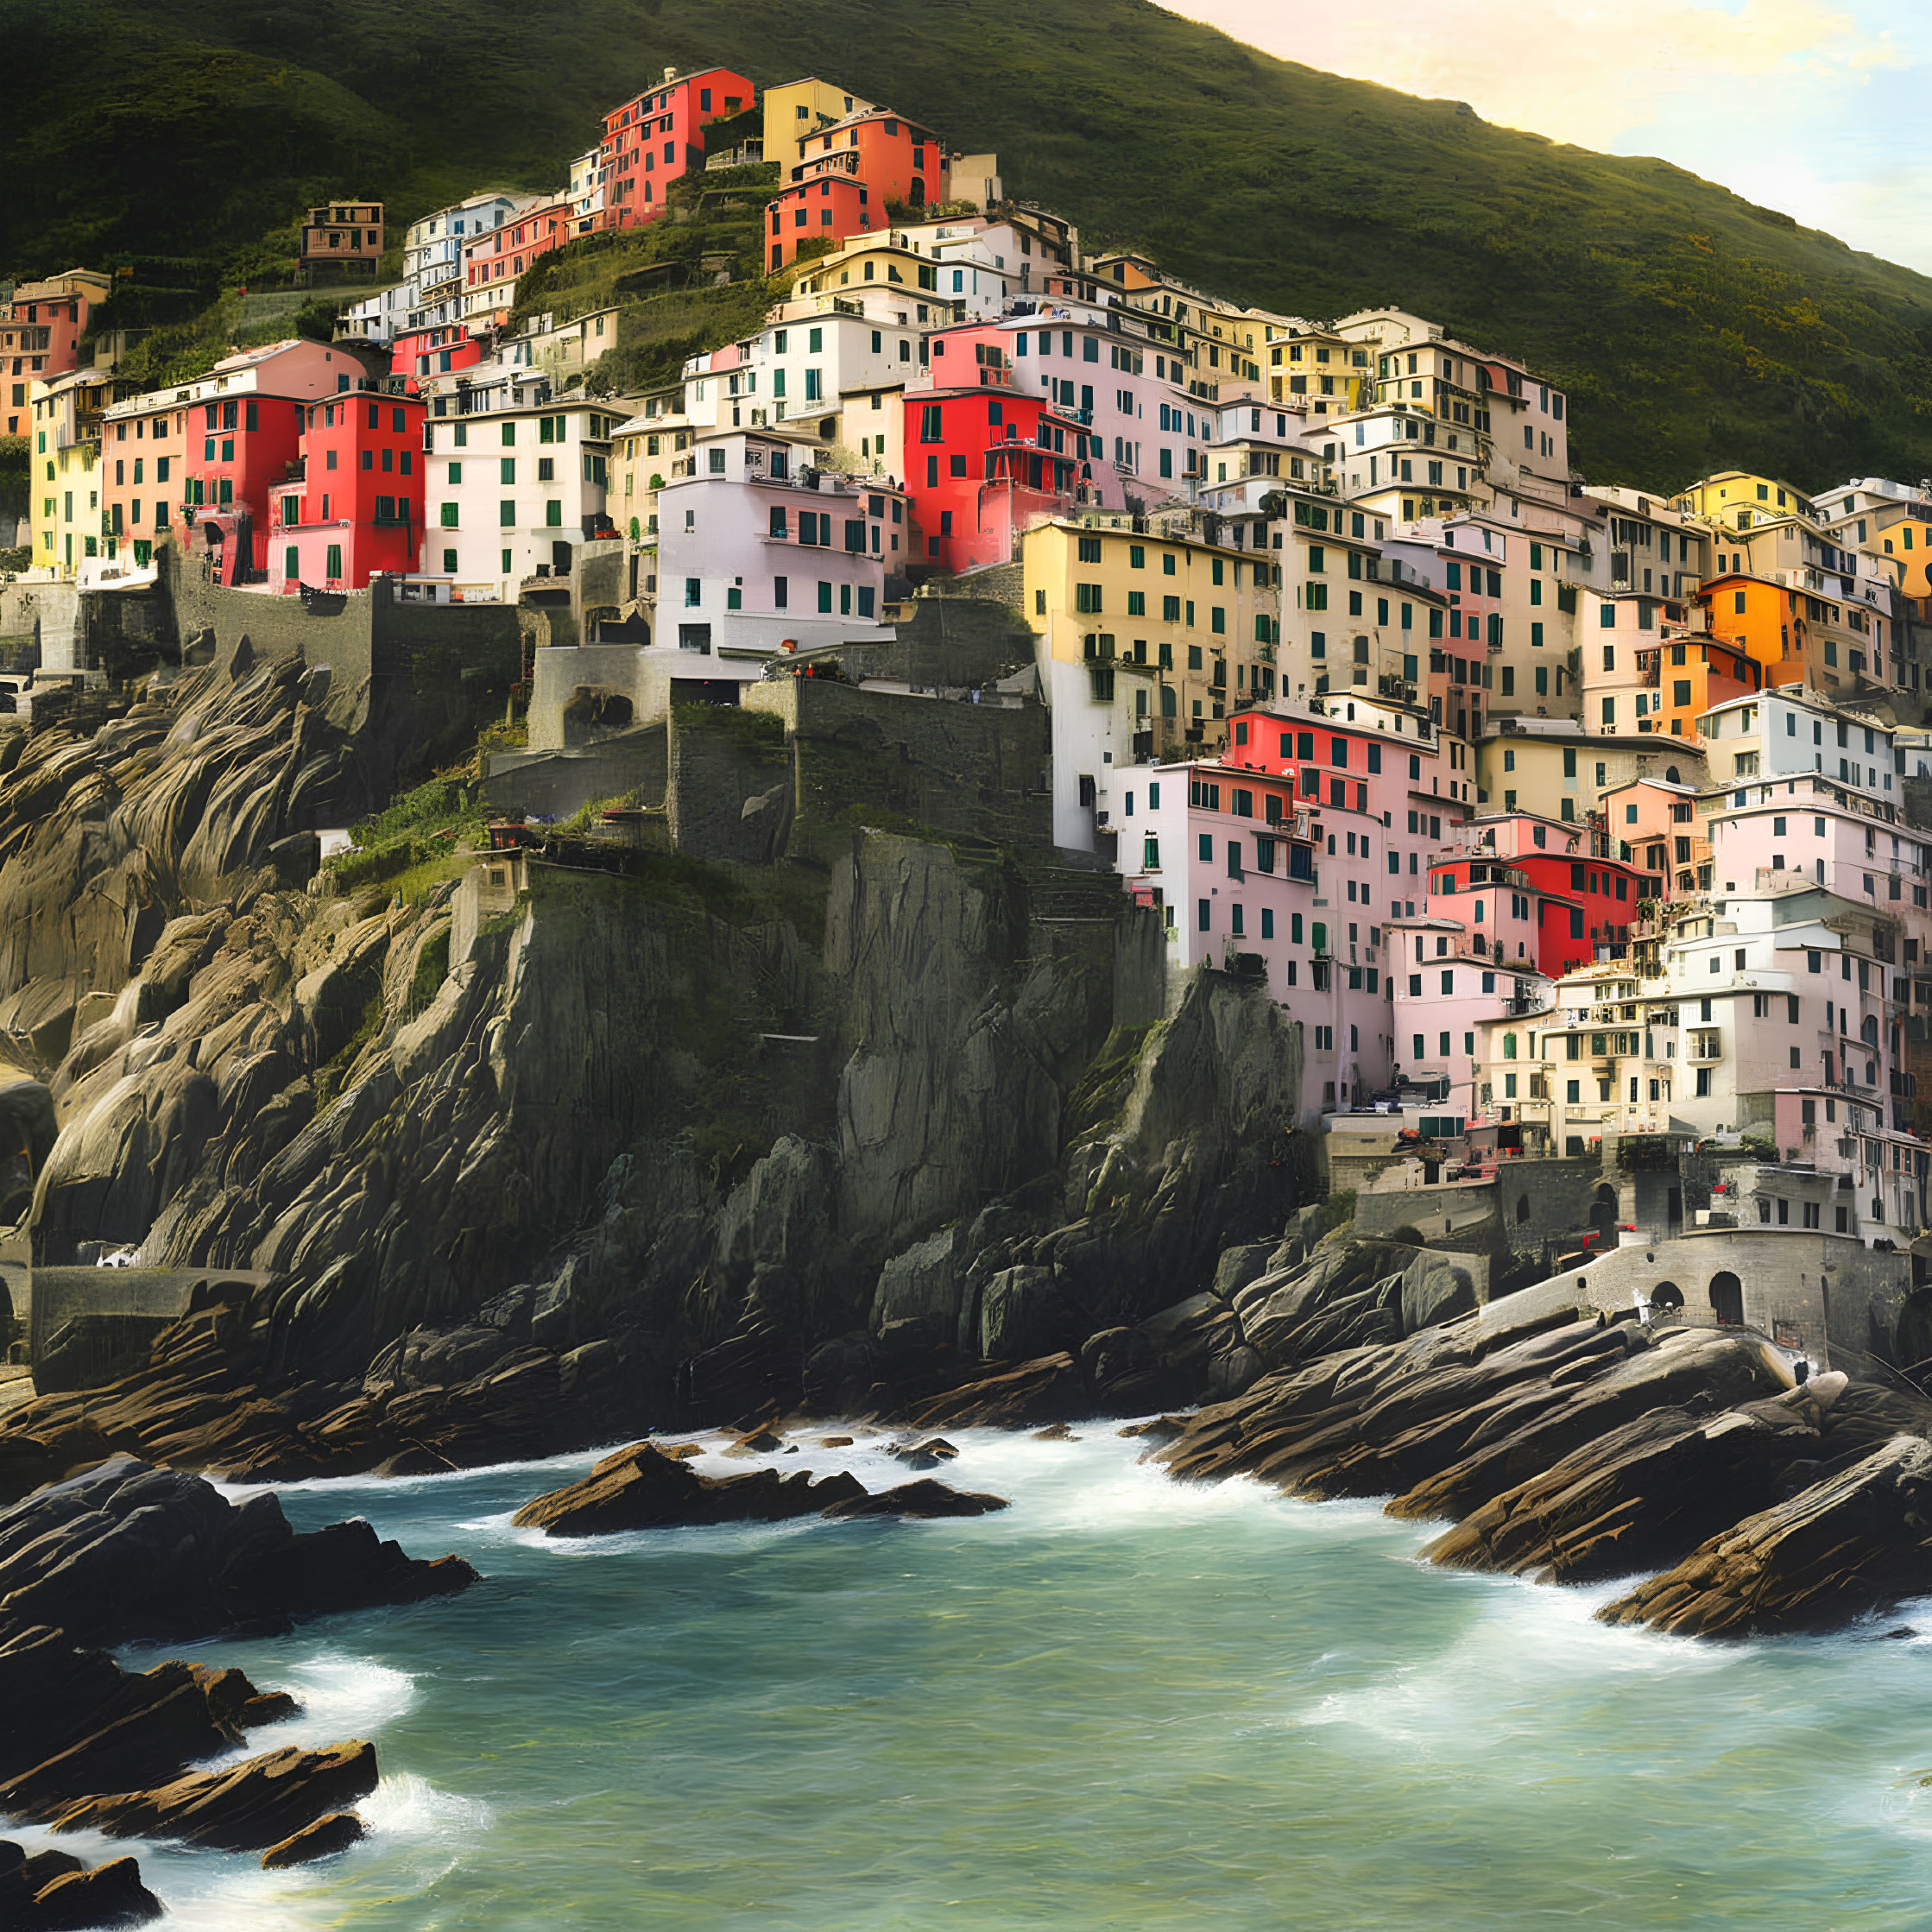 Vibrant houses on steep cliffs with rugged coastline and green hills